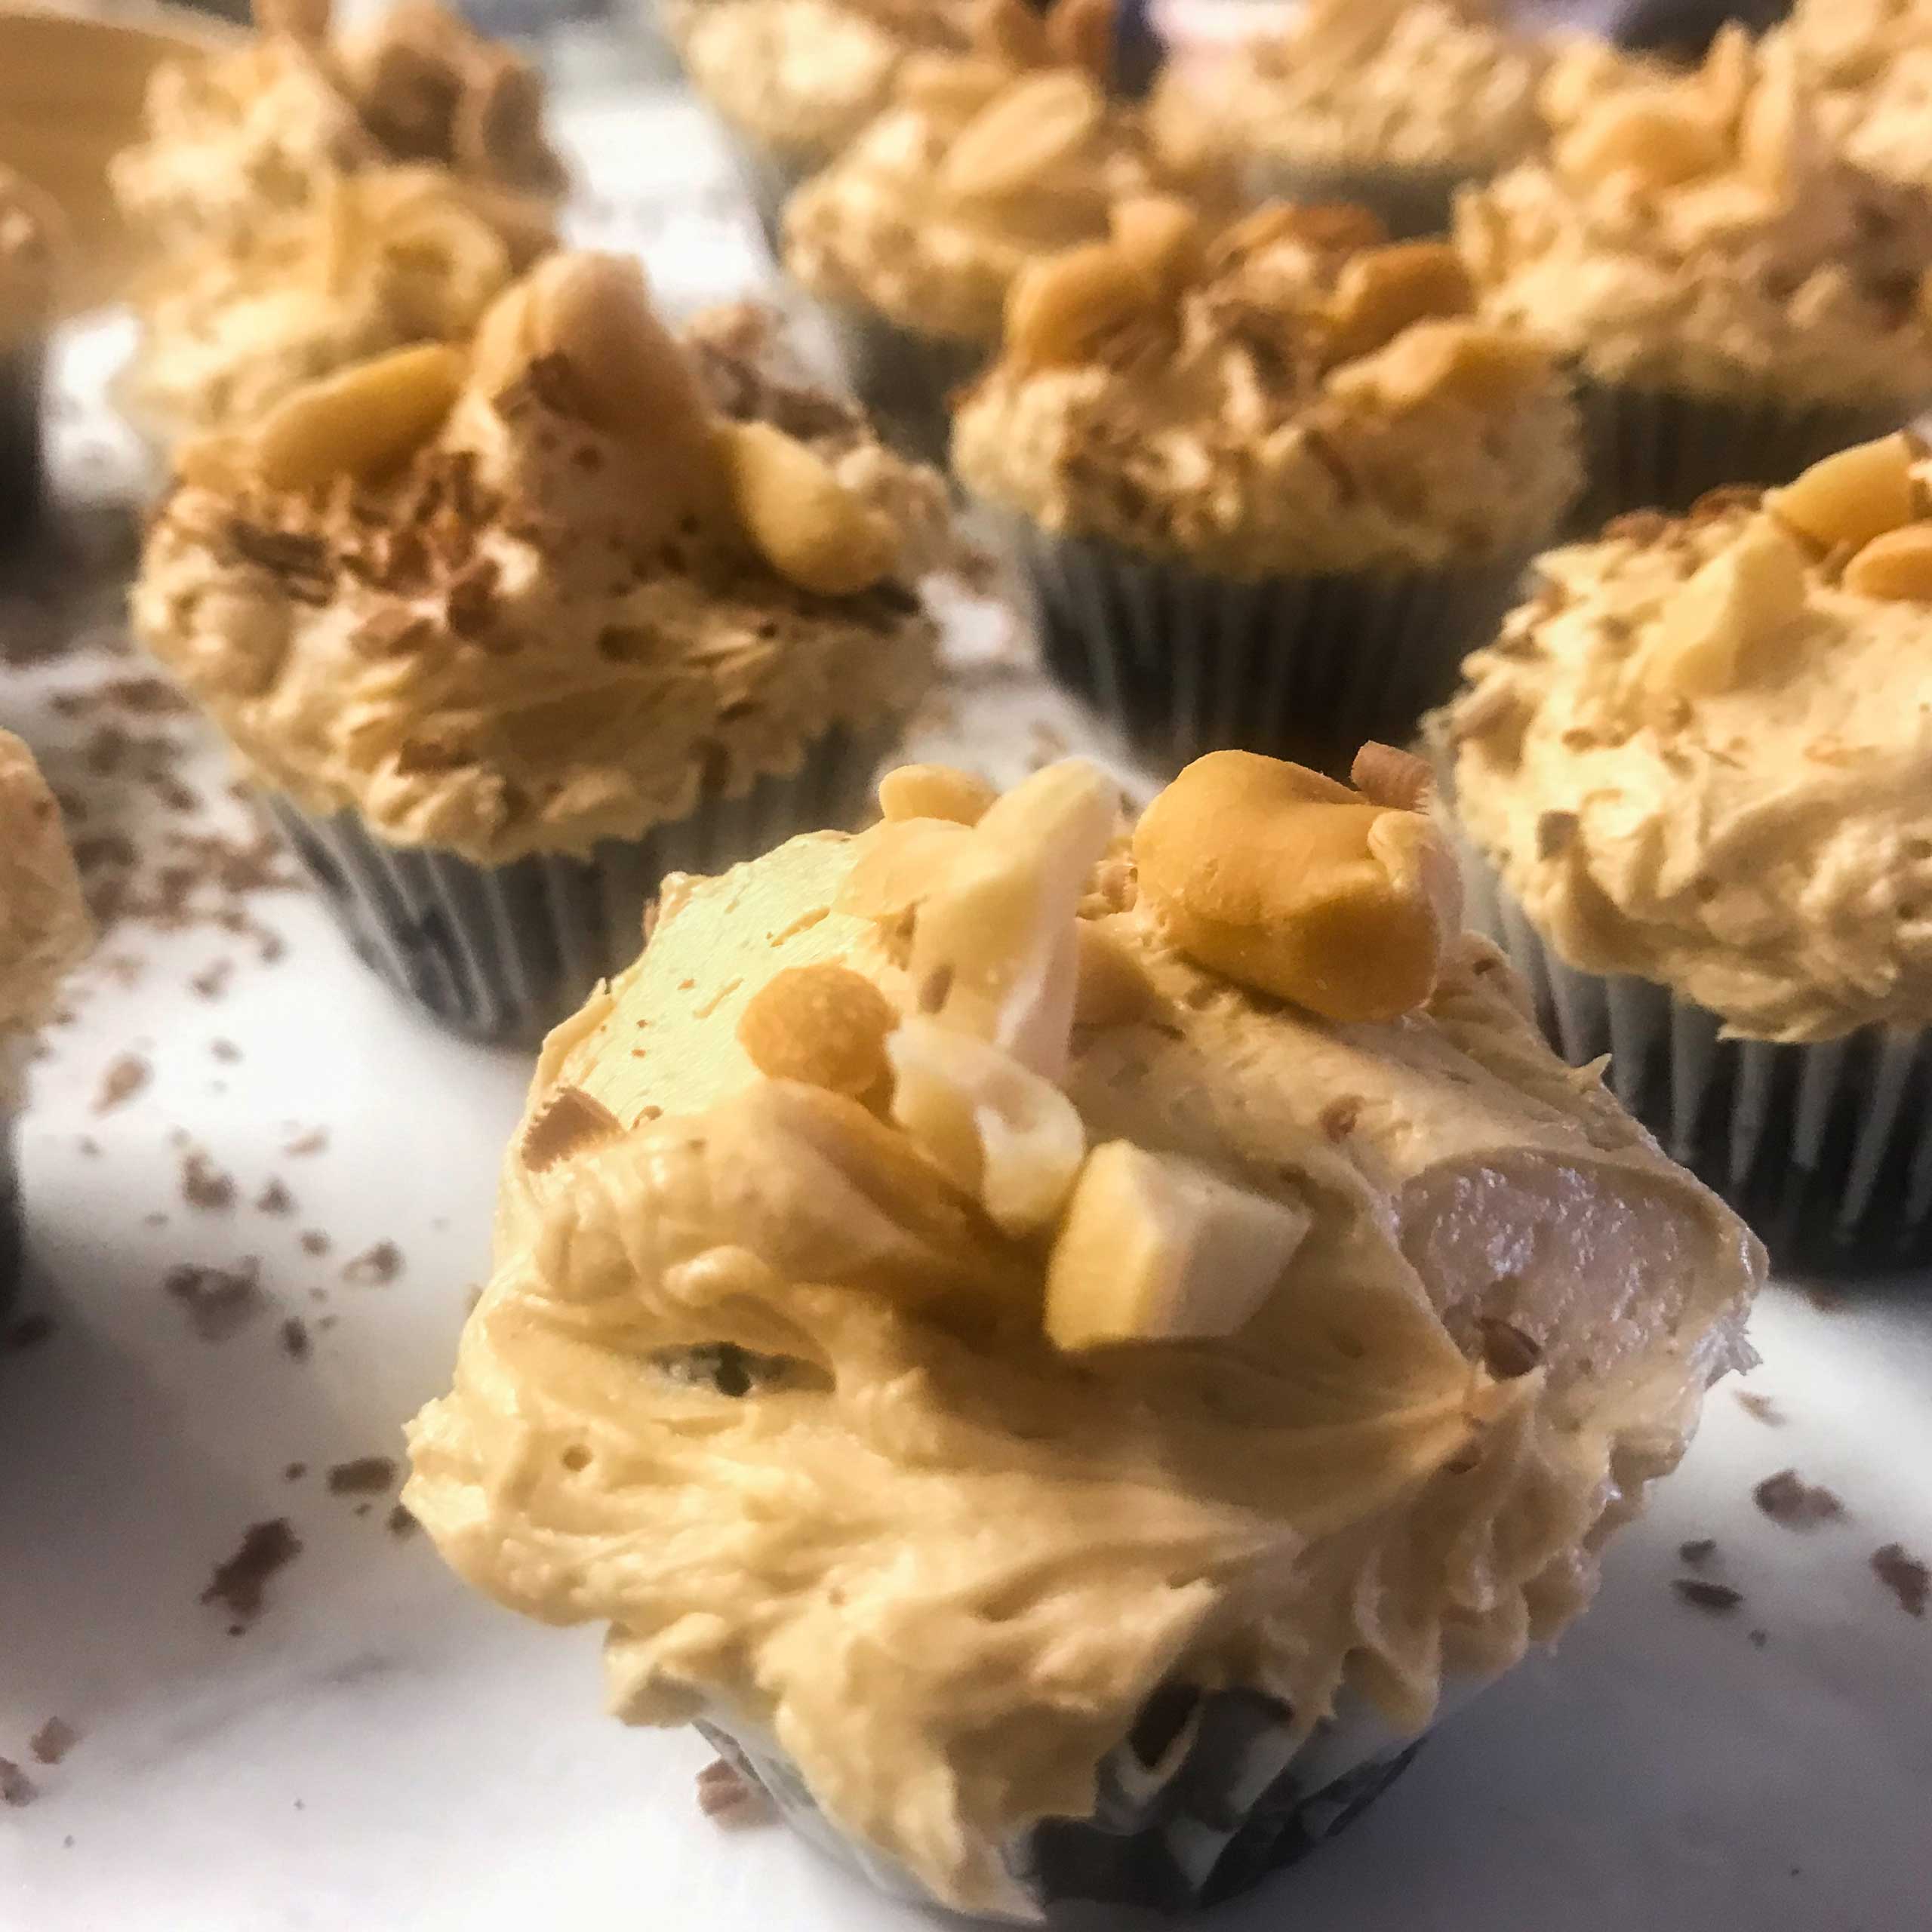 Gluten-Free Chocolate-Peanut Butter Cupcakes | My Curated Tastes